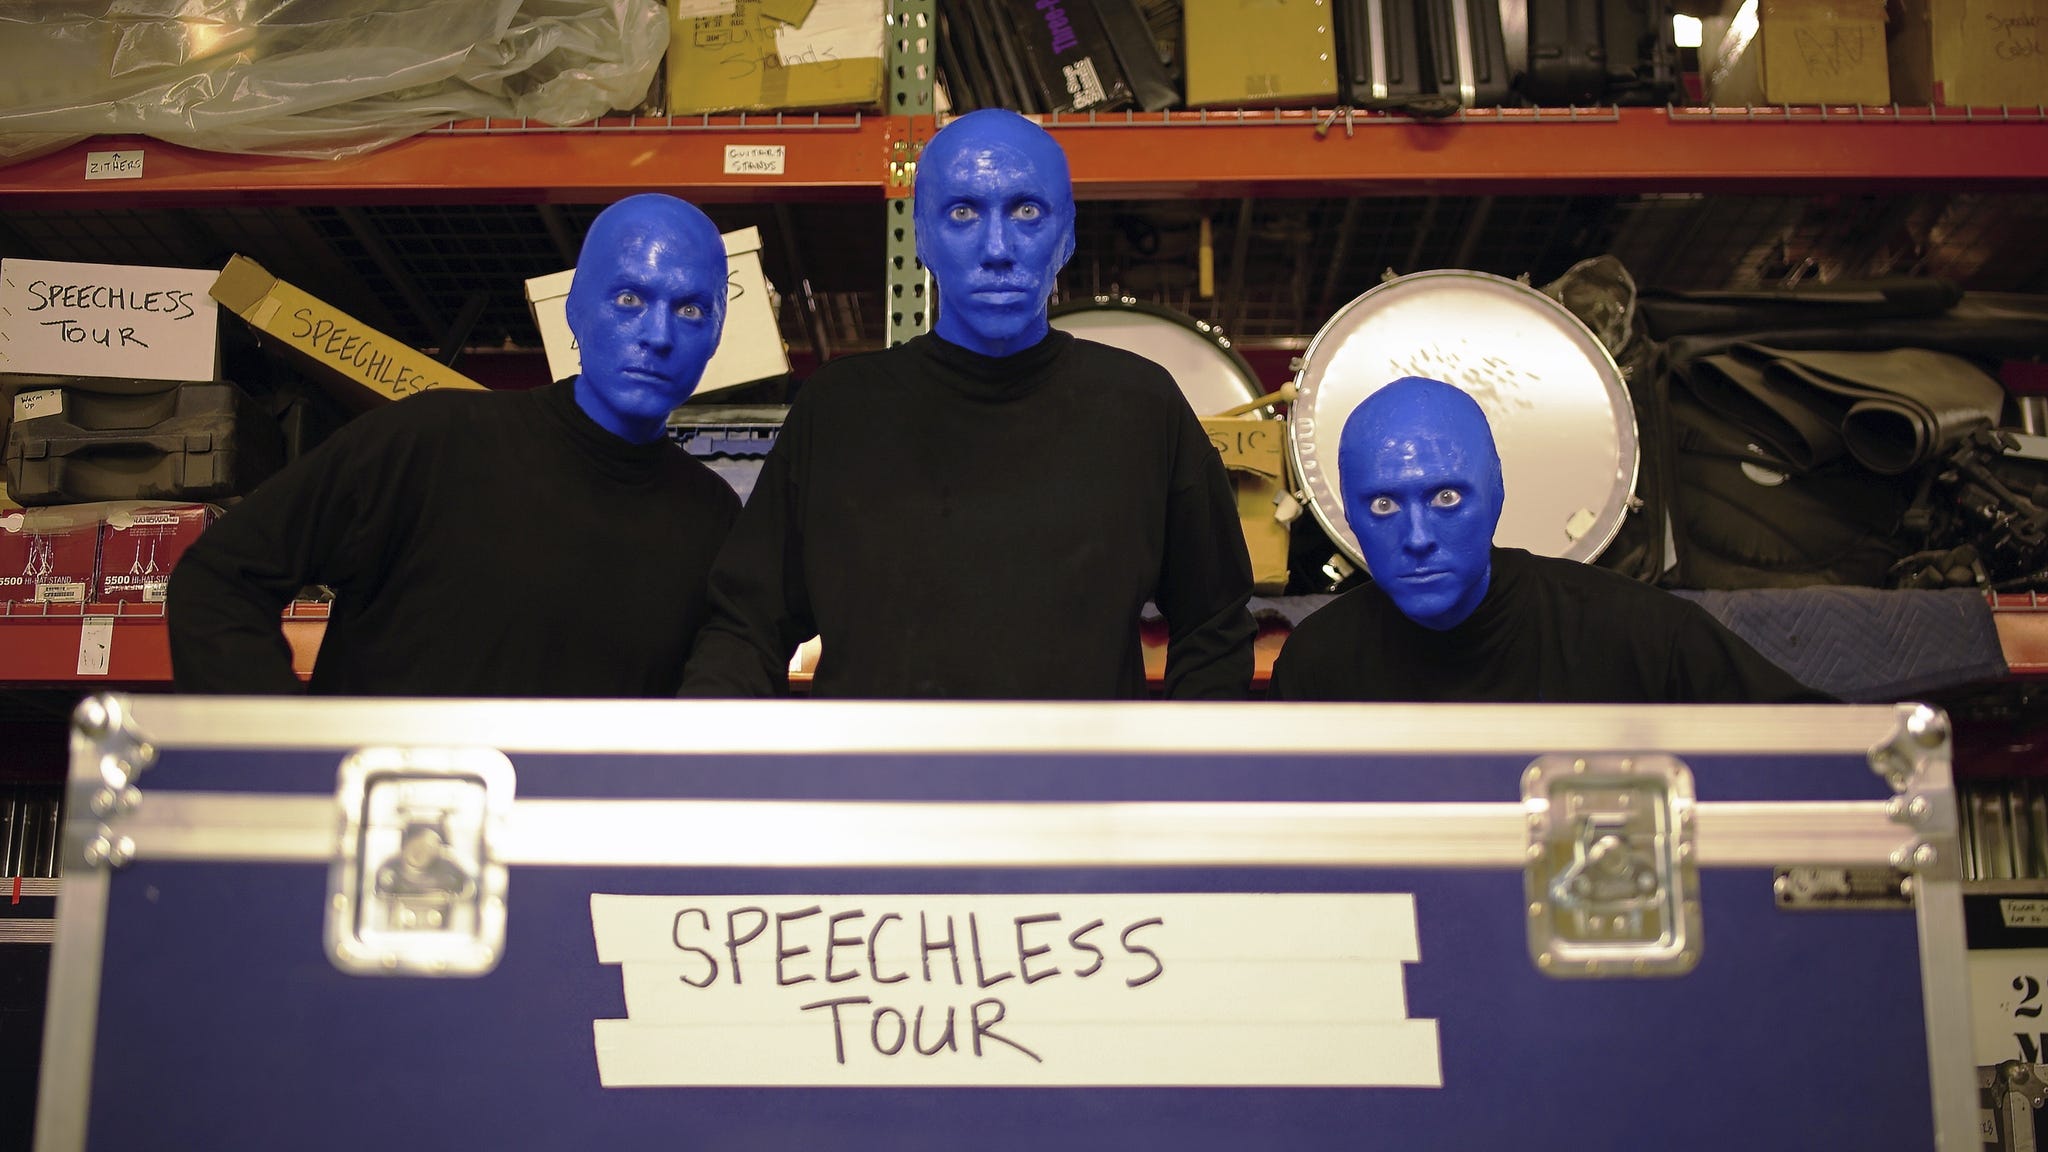 Blue Man Group Wallpapers